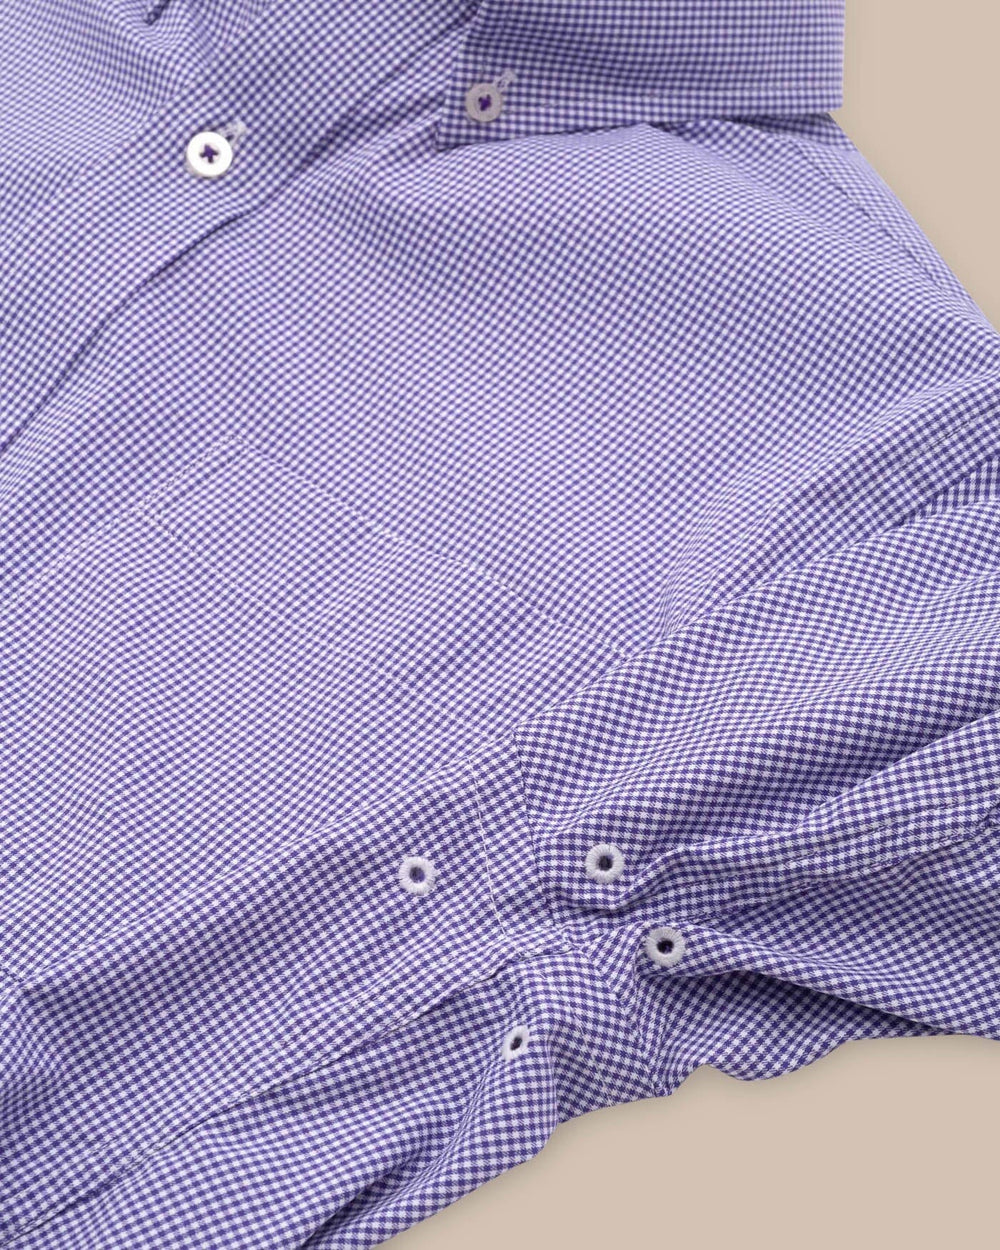 The detail view of the Southern Tide Team Colors Gingham Intercoastal Sport Shirt by Southern Tide - Regal Purple